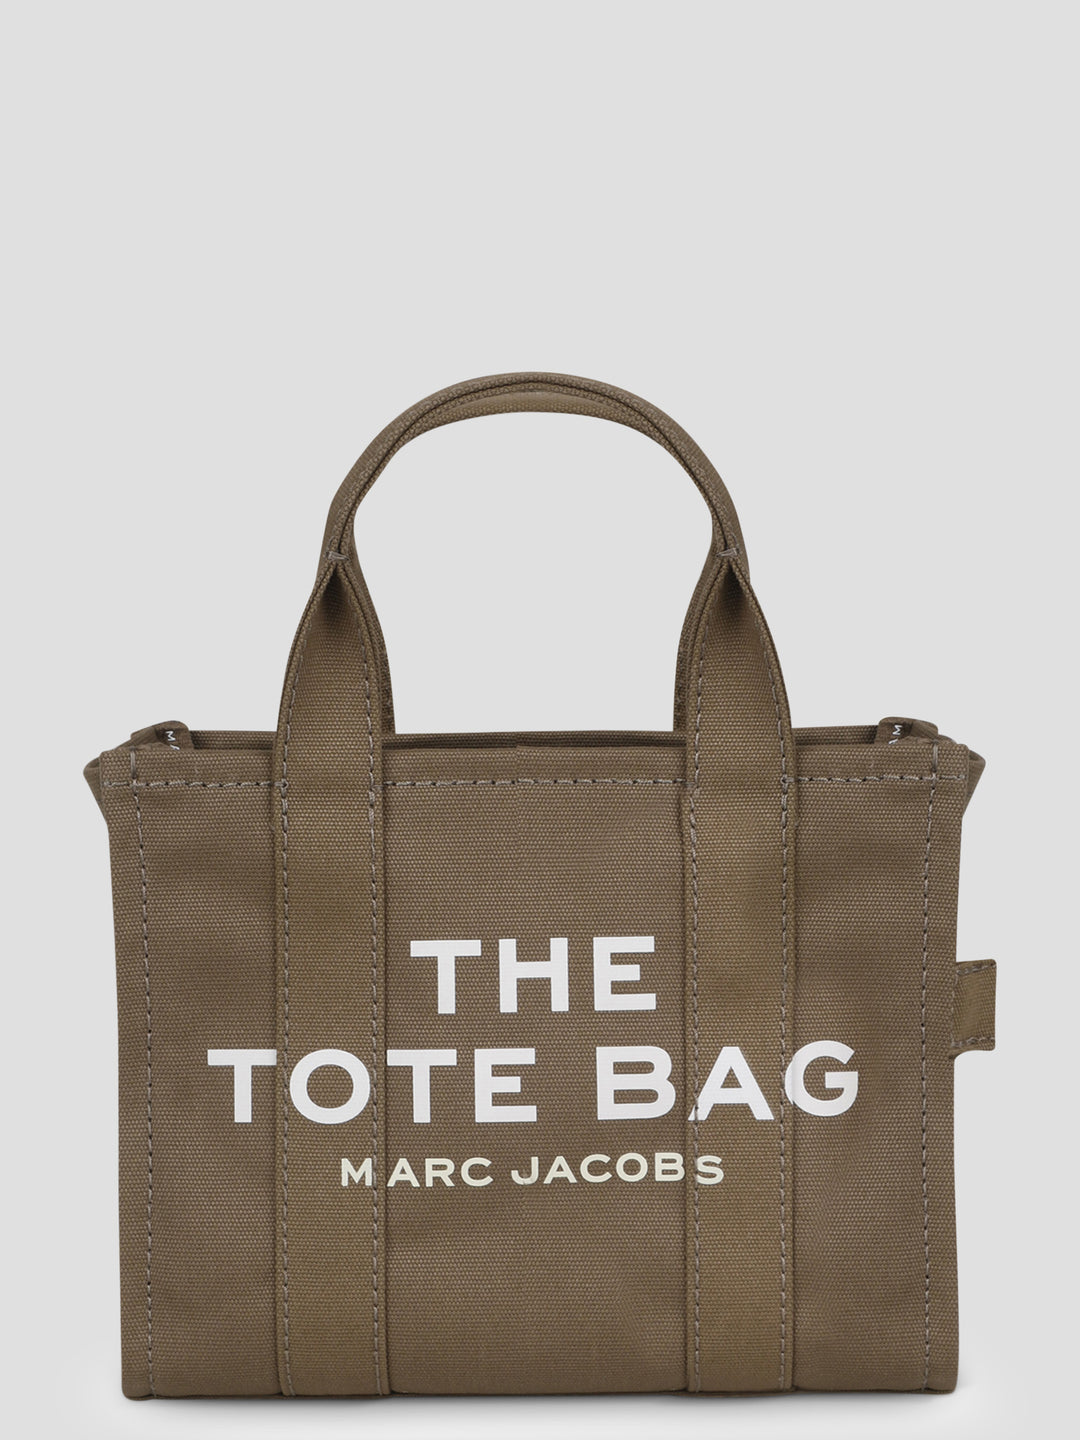 The small tote bag